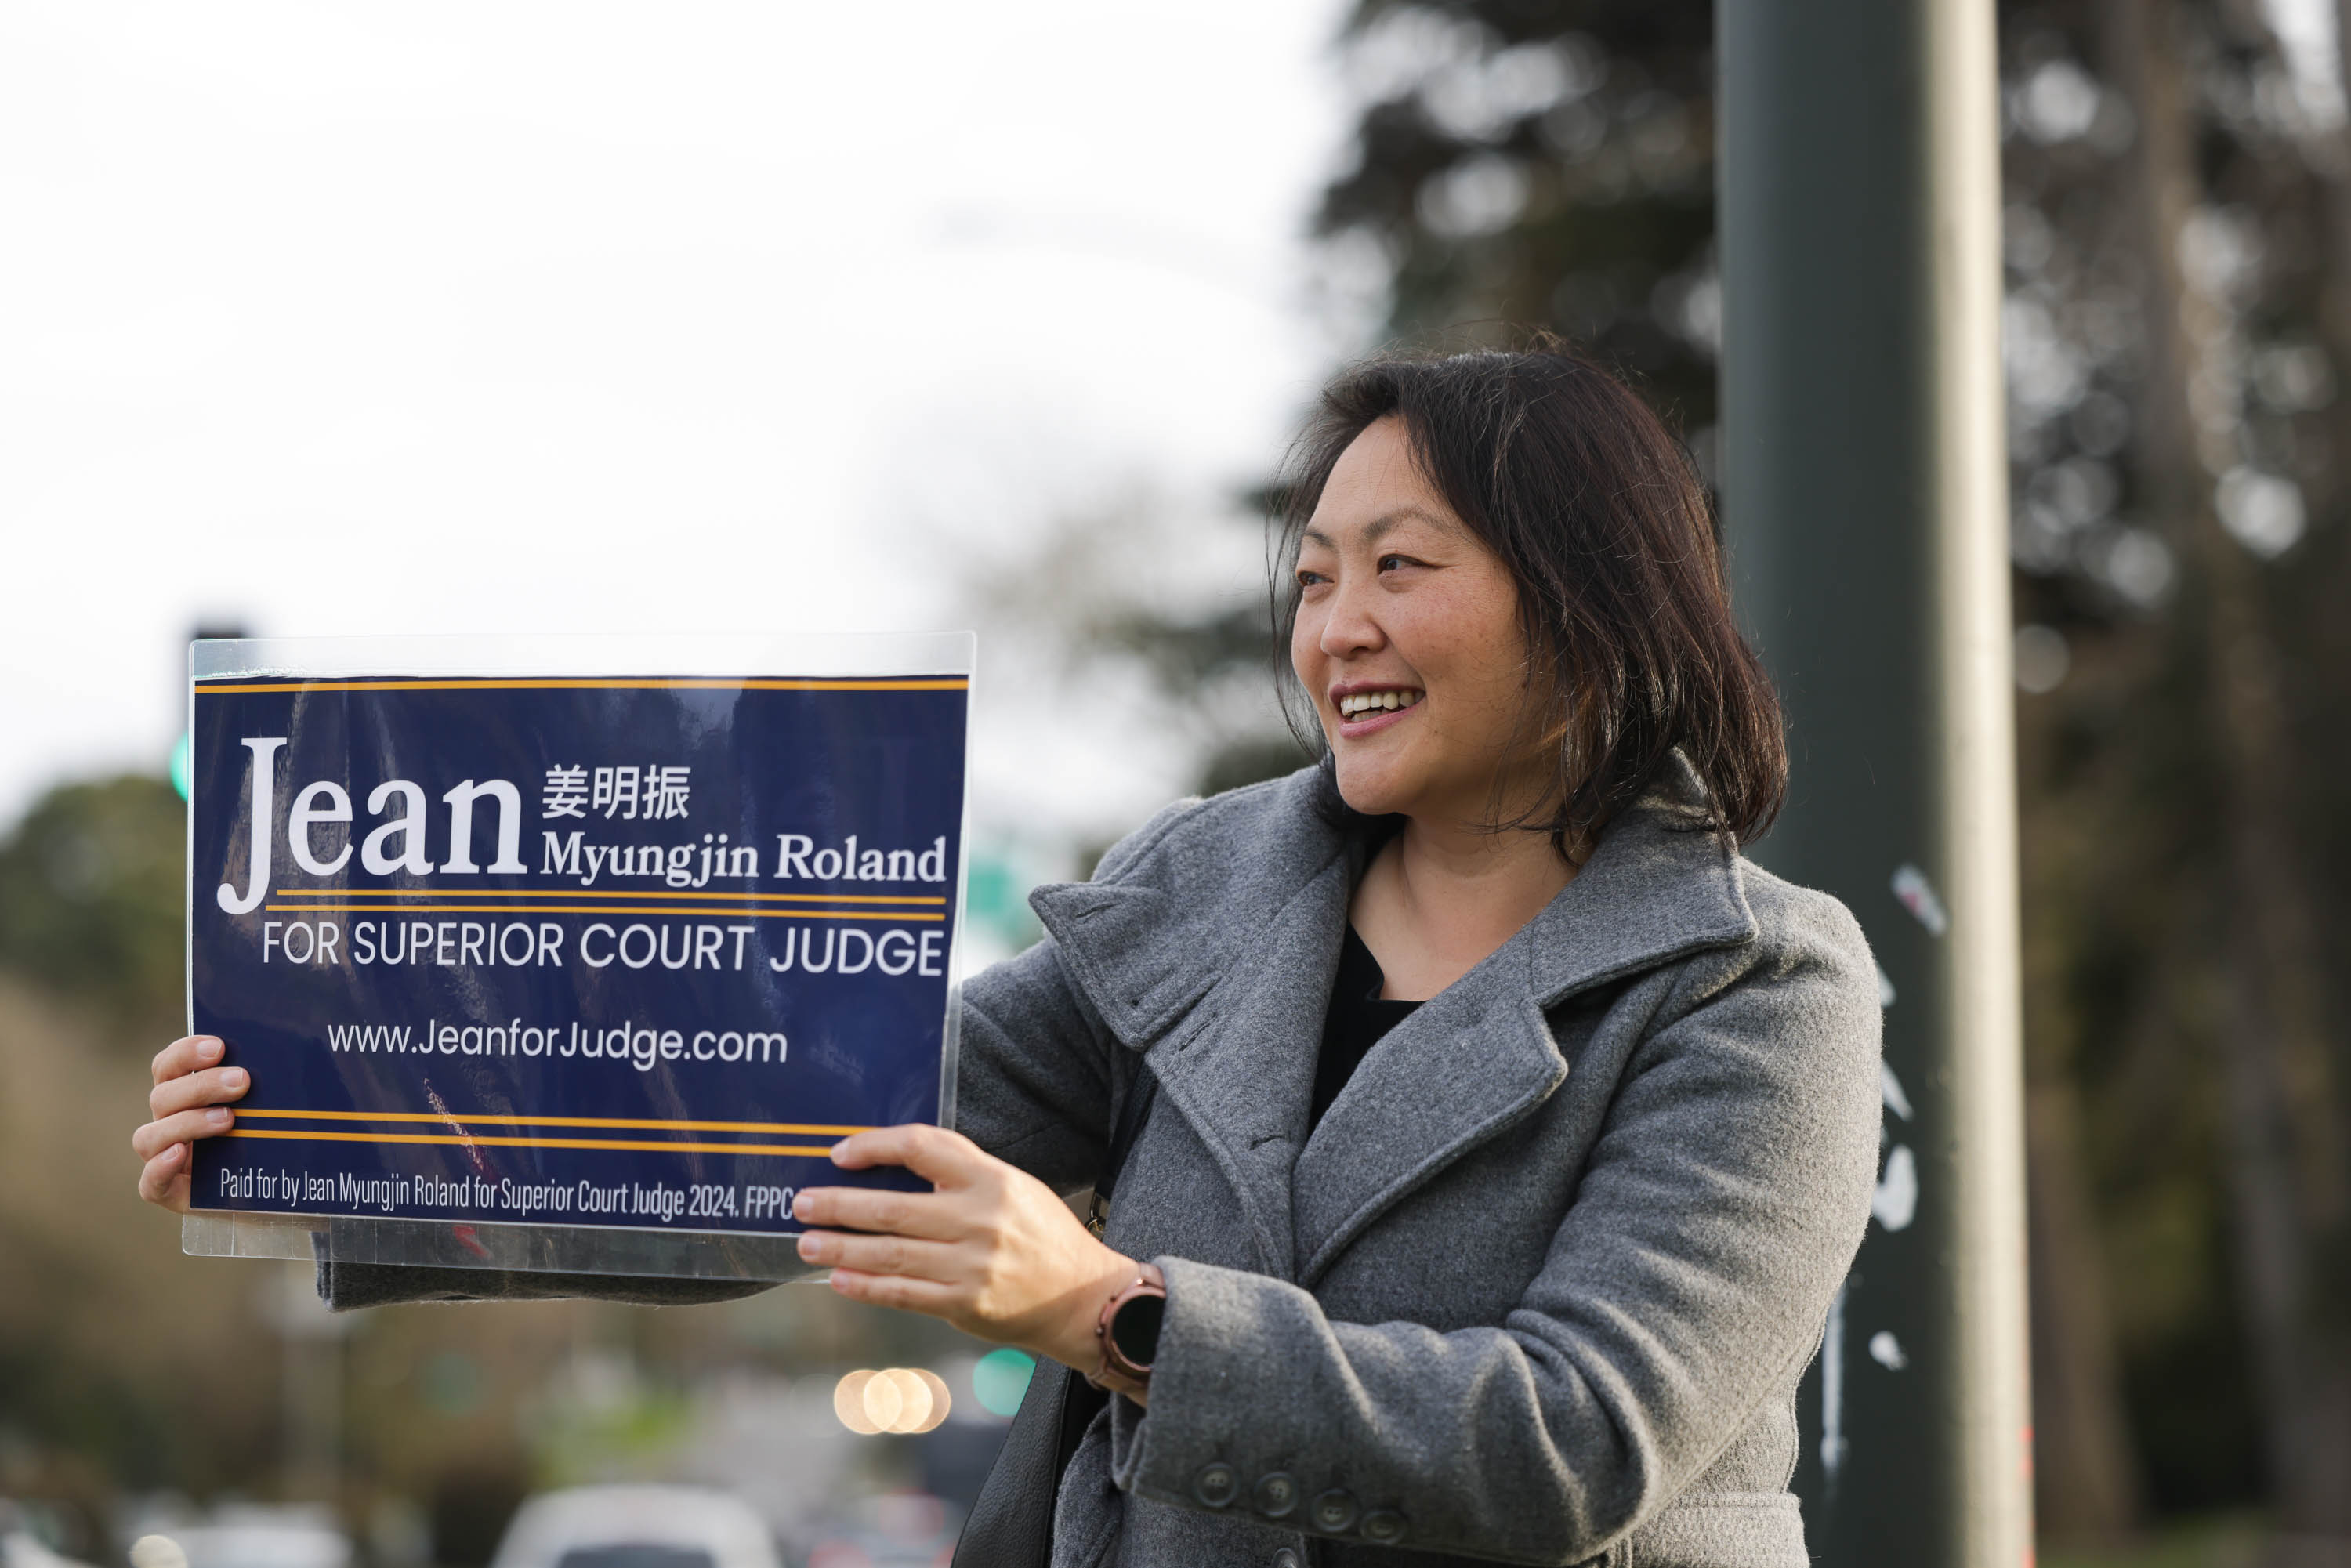 A smiling woman holds a campaign sign for &quot;Jean Myungjin Roland for Superior Court Judge.&quot;